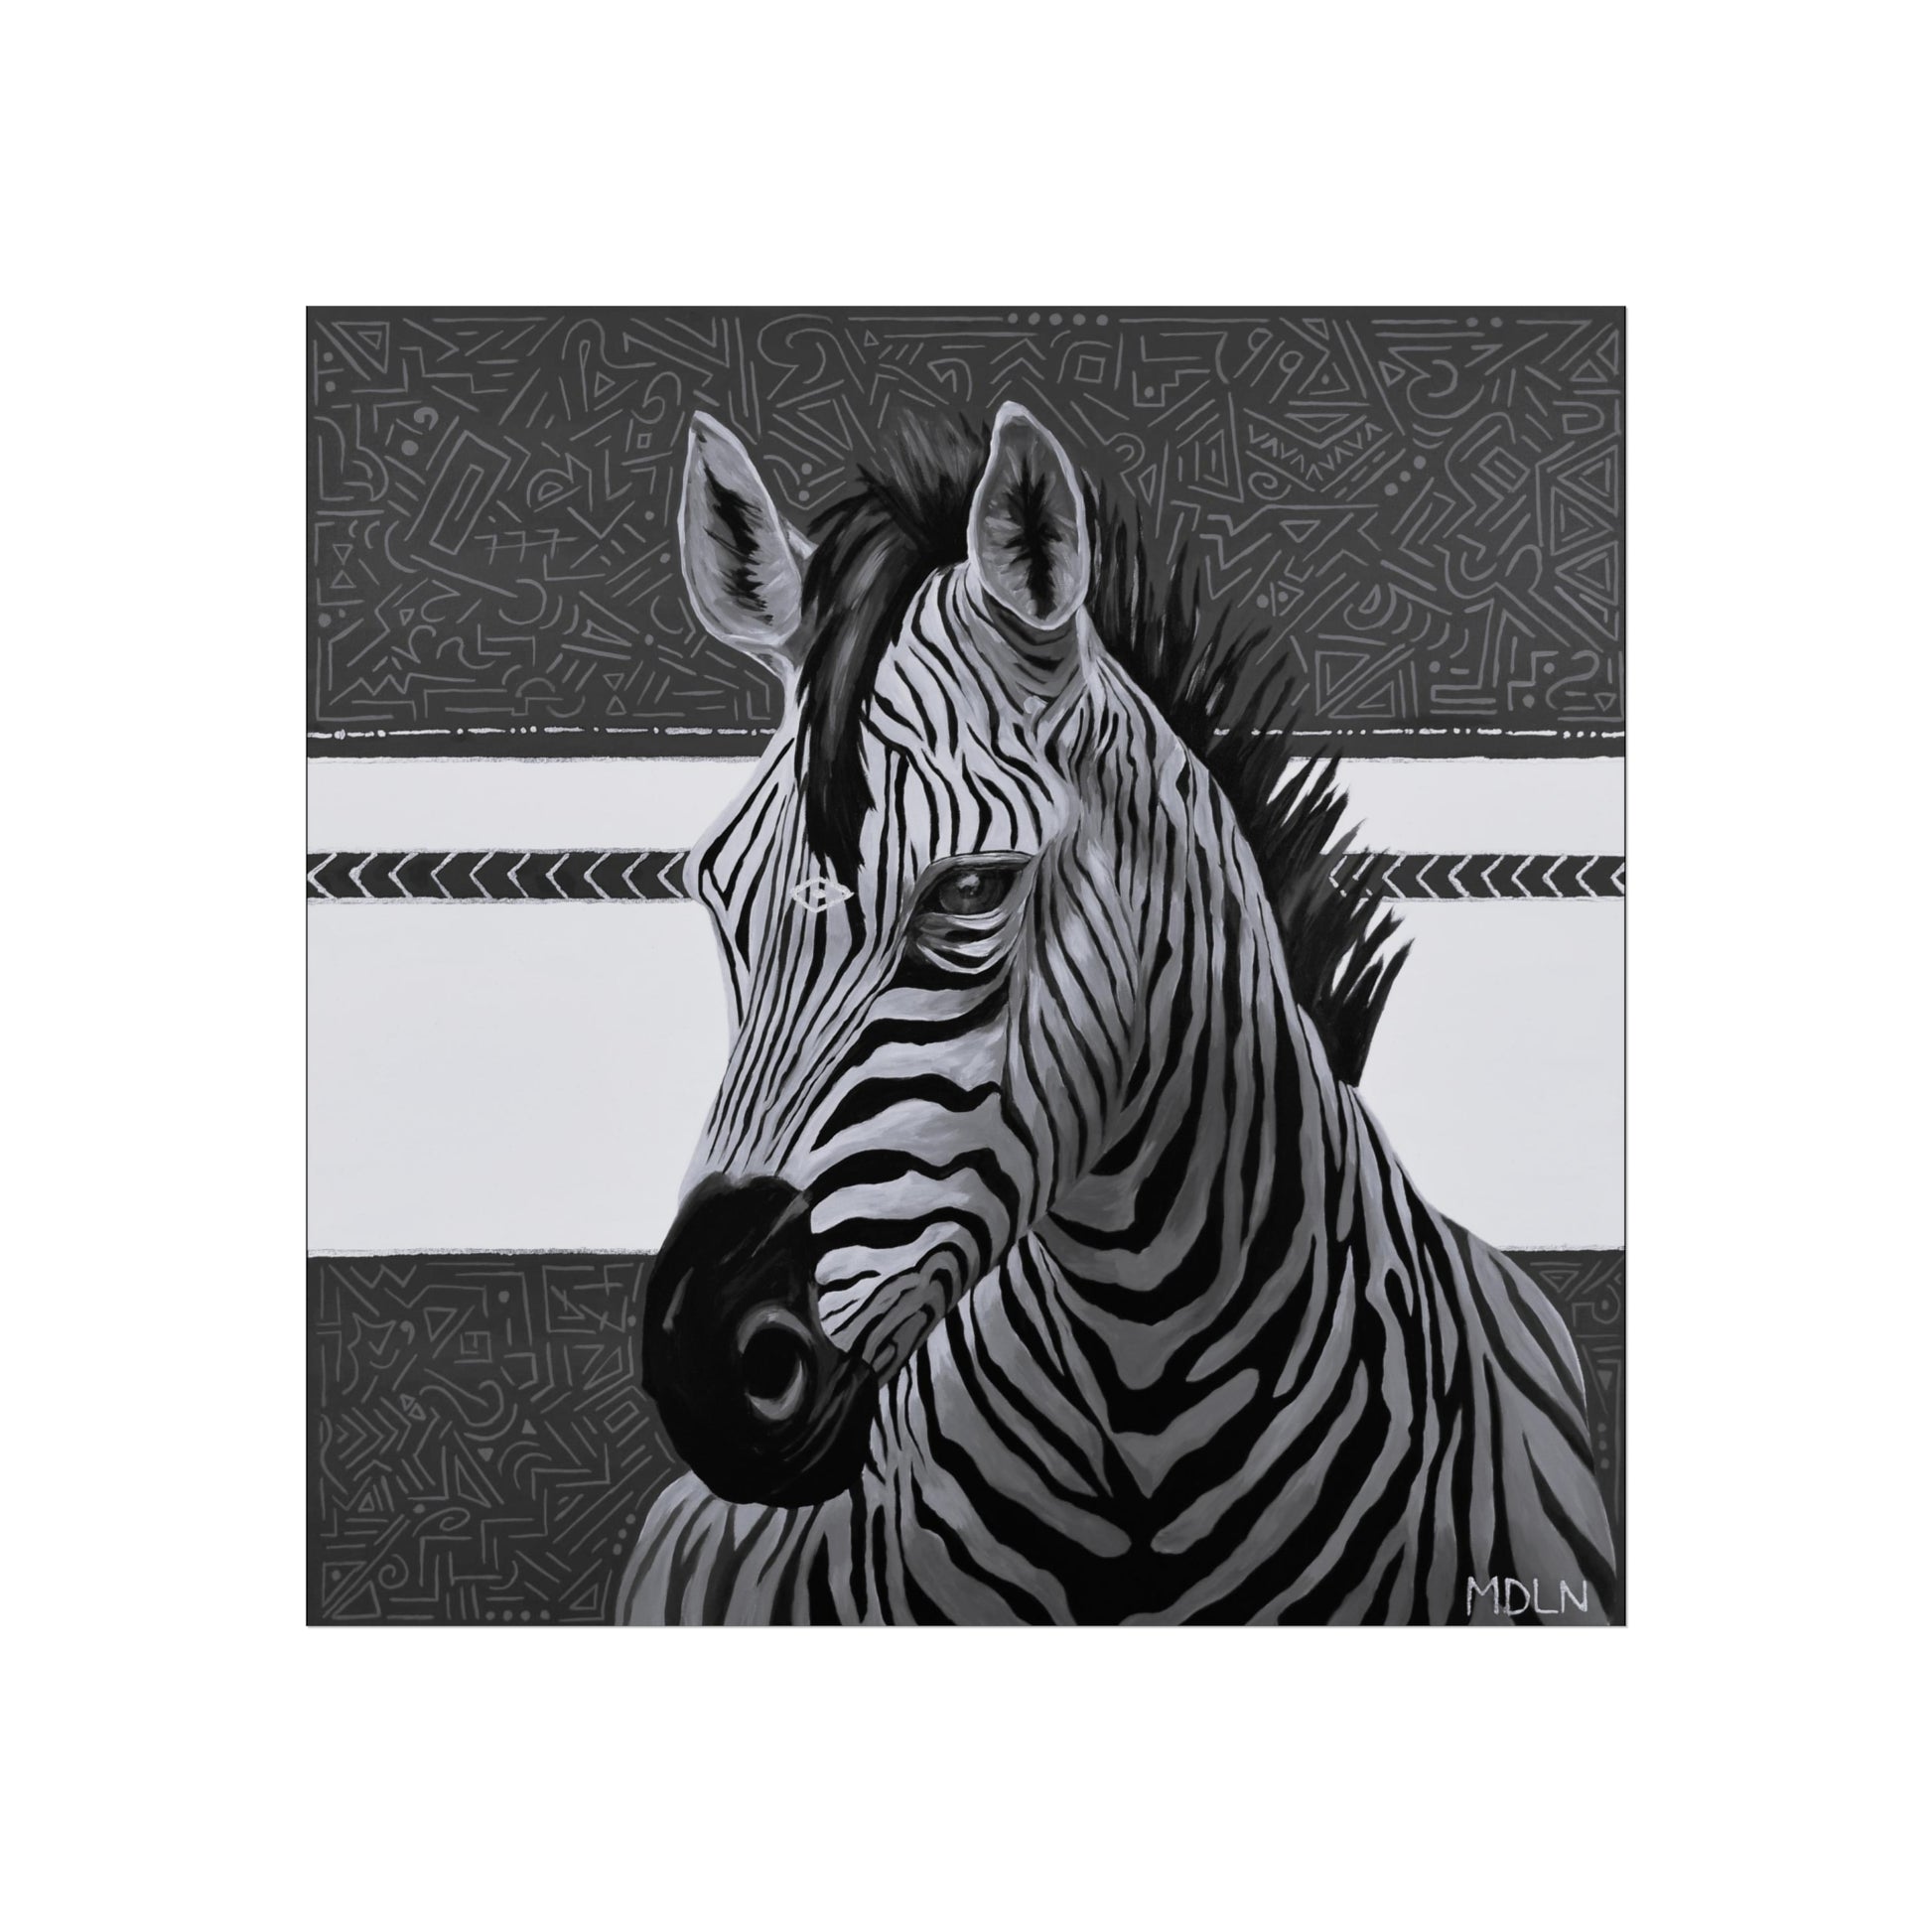 A black and white  giclee art print of a majestic zebra painting with abstract background, zebra art